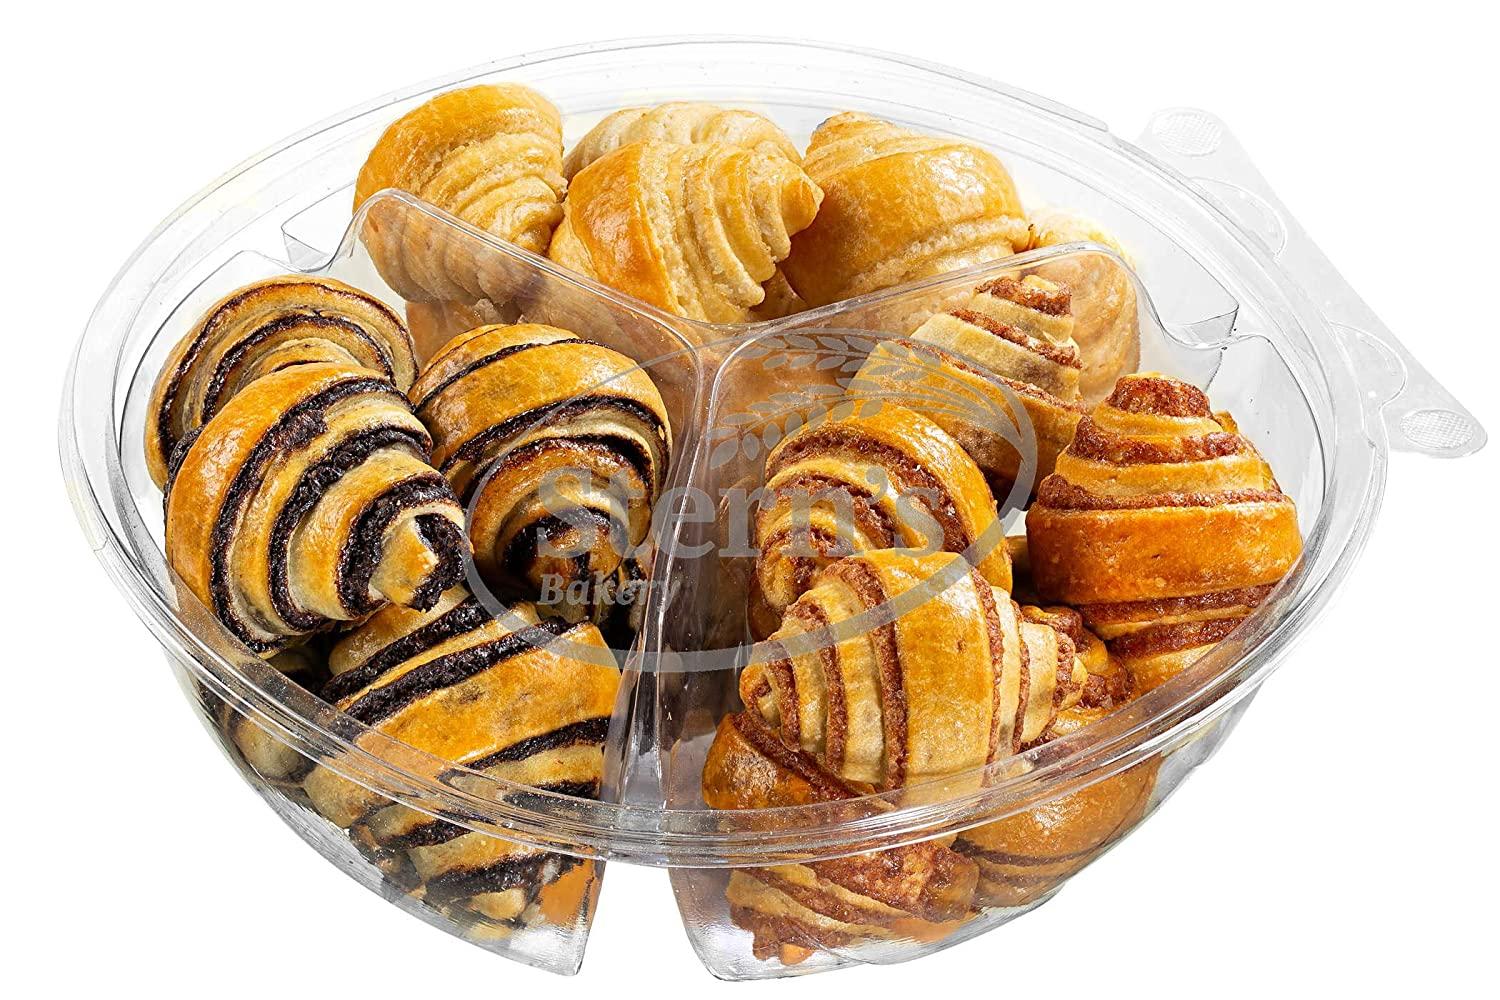 Rugelach Pastries Sympathy Gift Basket | New Recipe | 20 Oz Gift